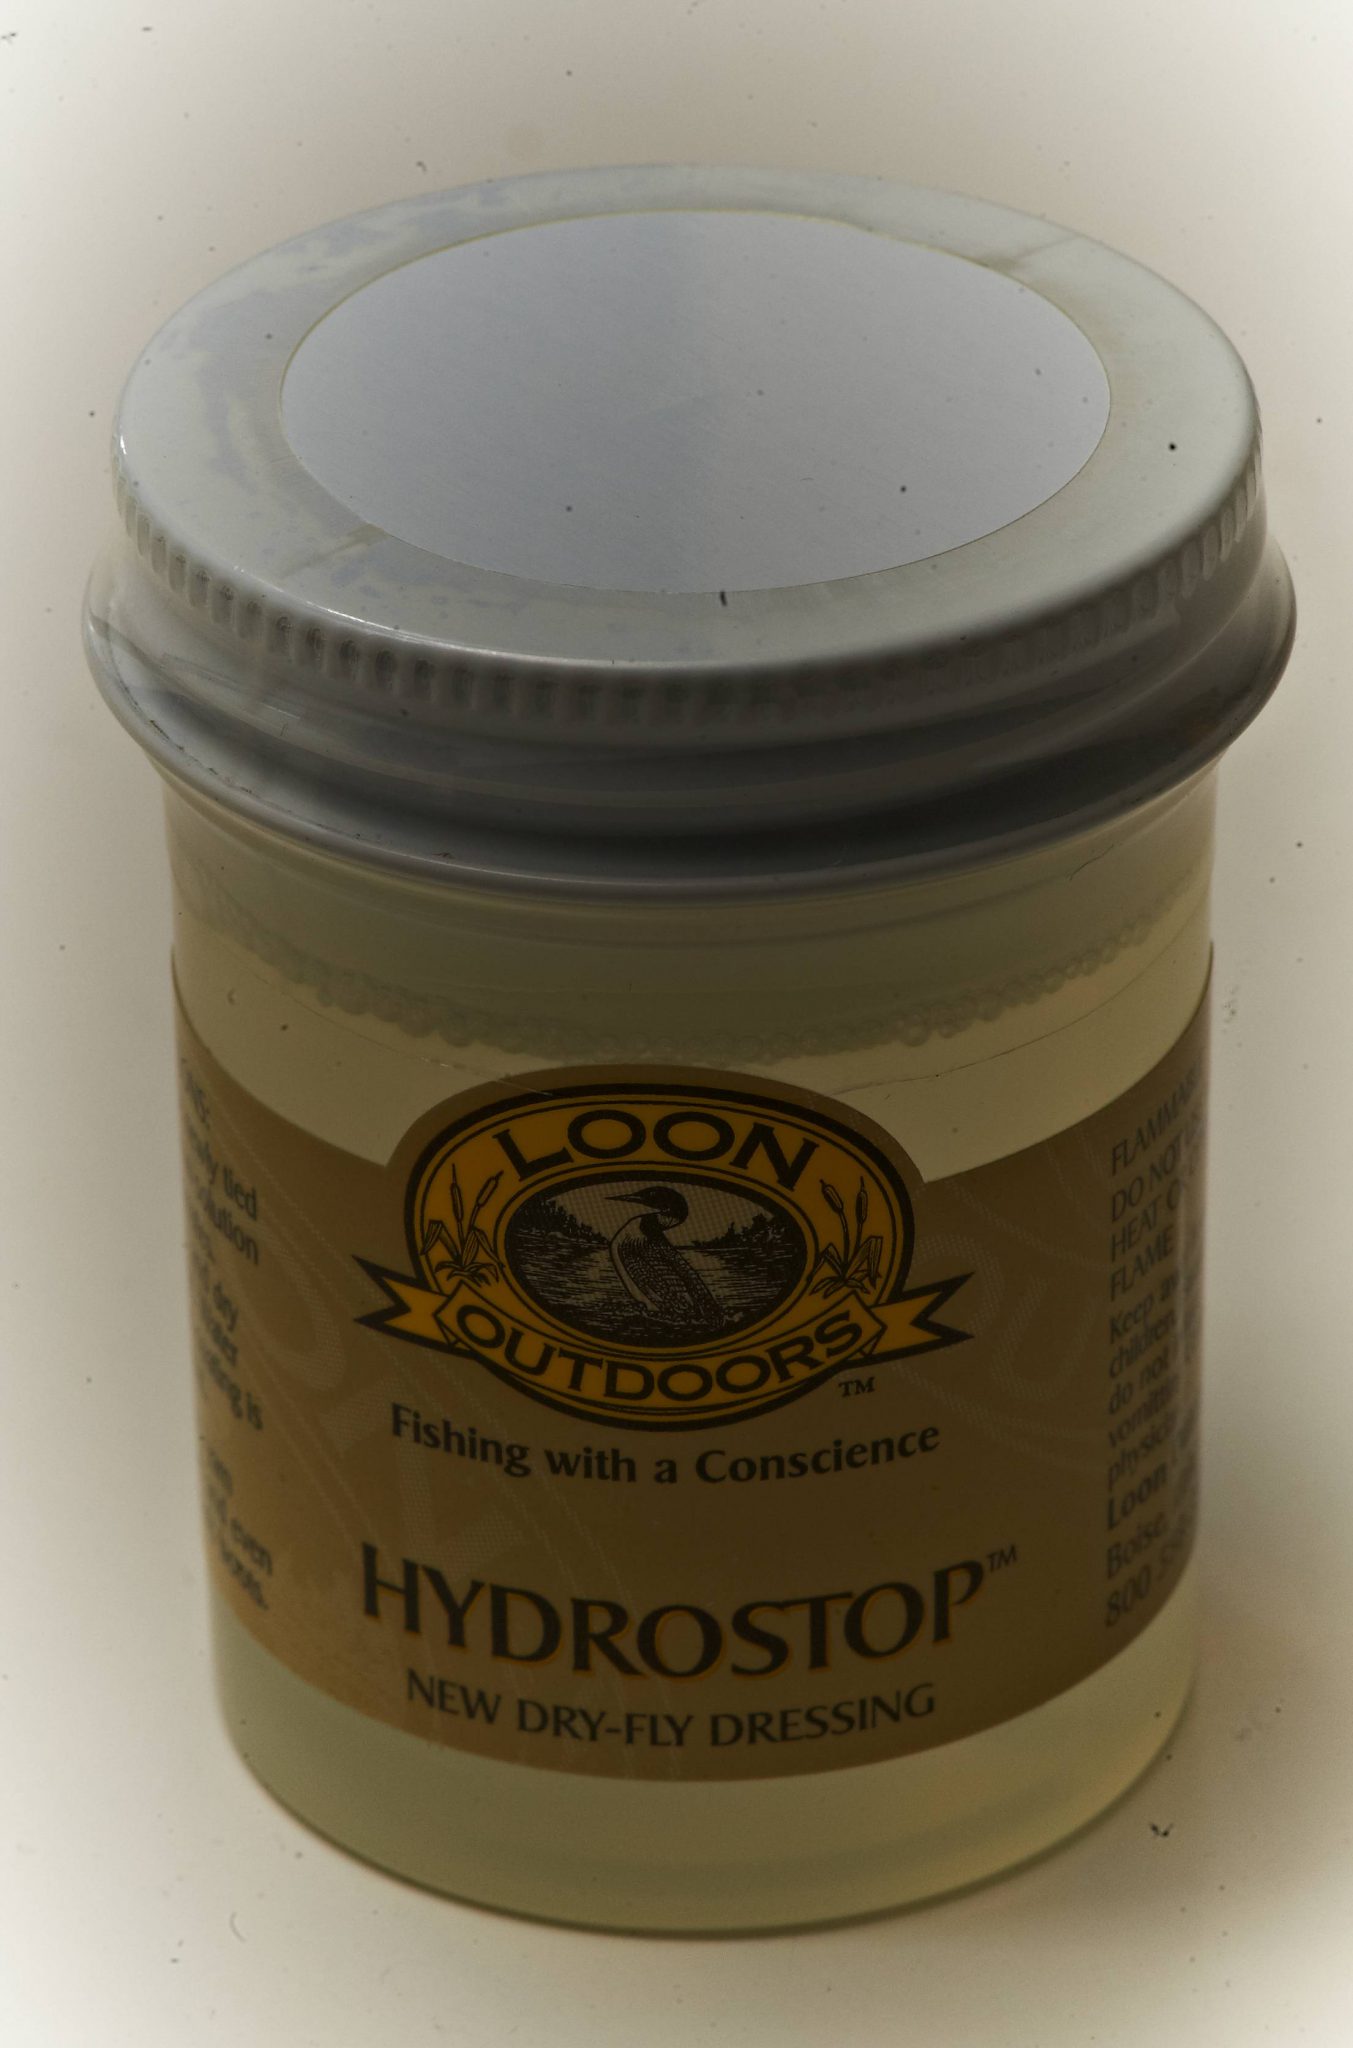 Hydrostop from Loon